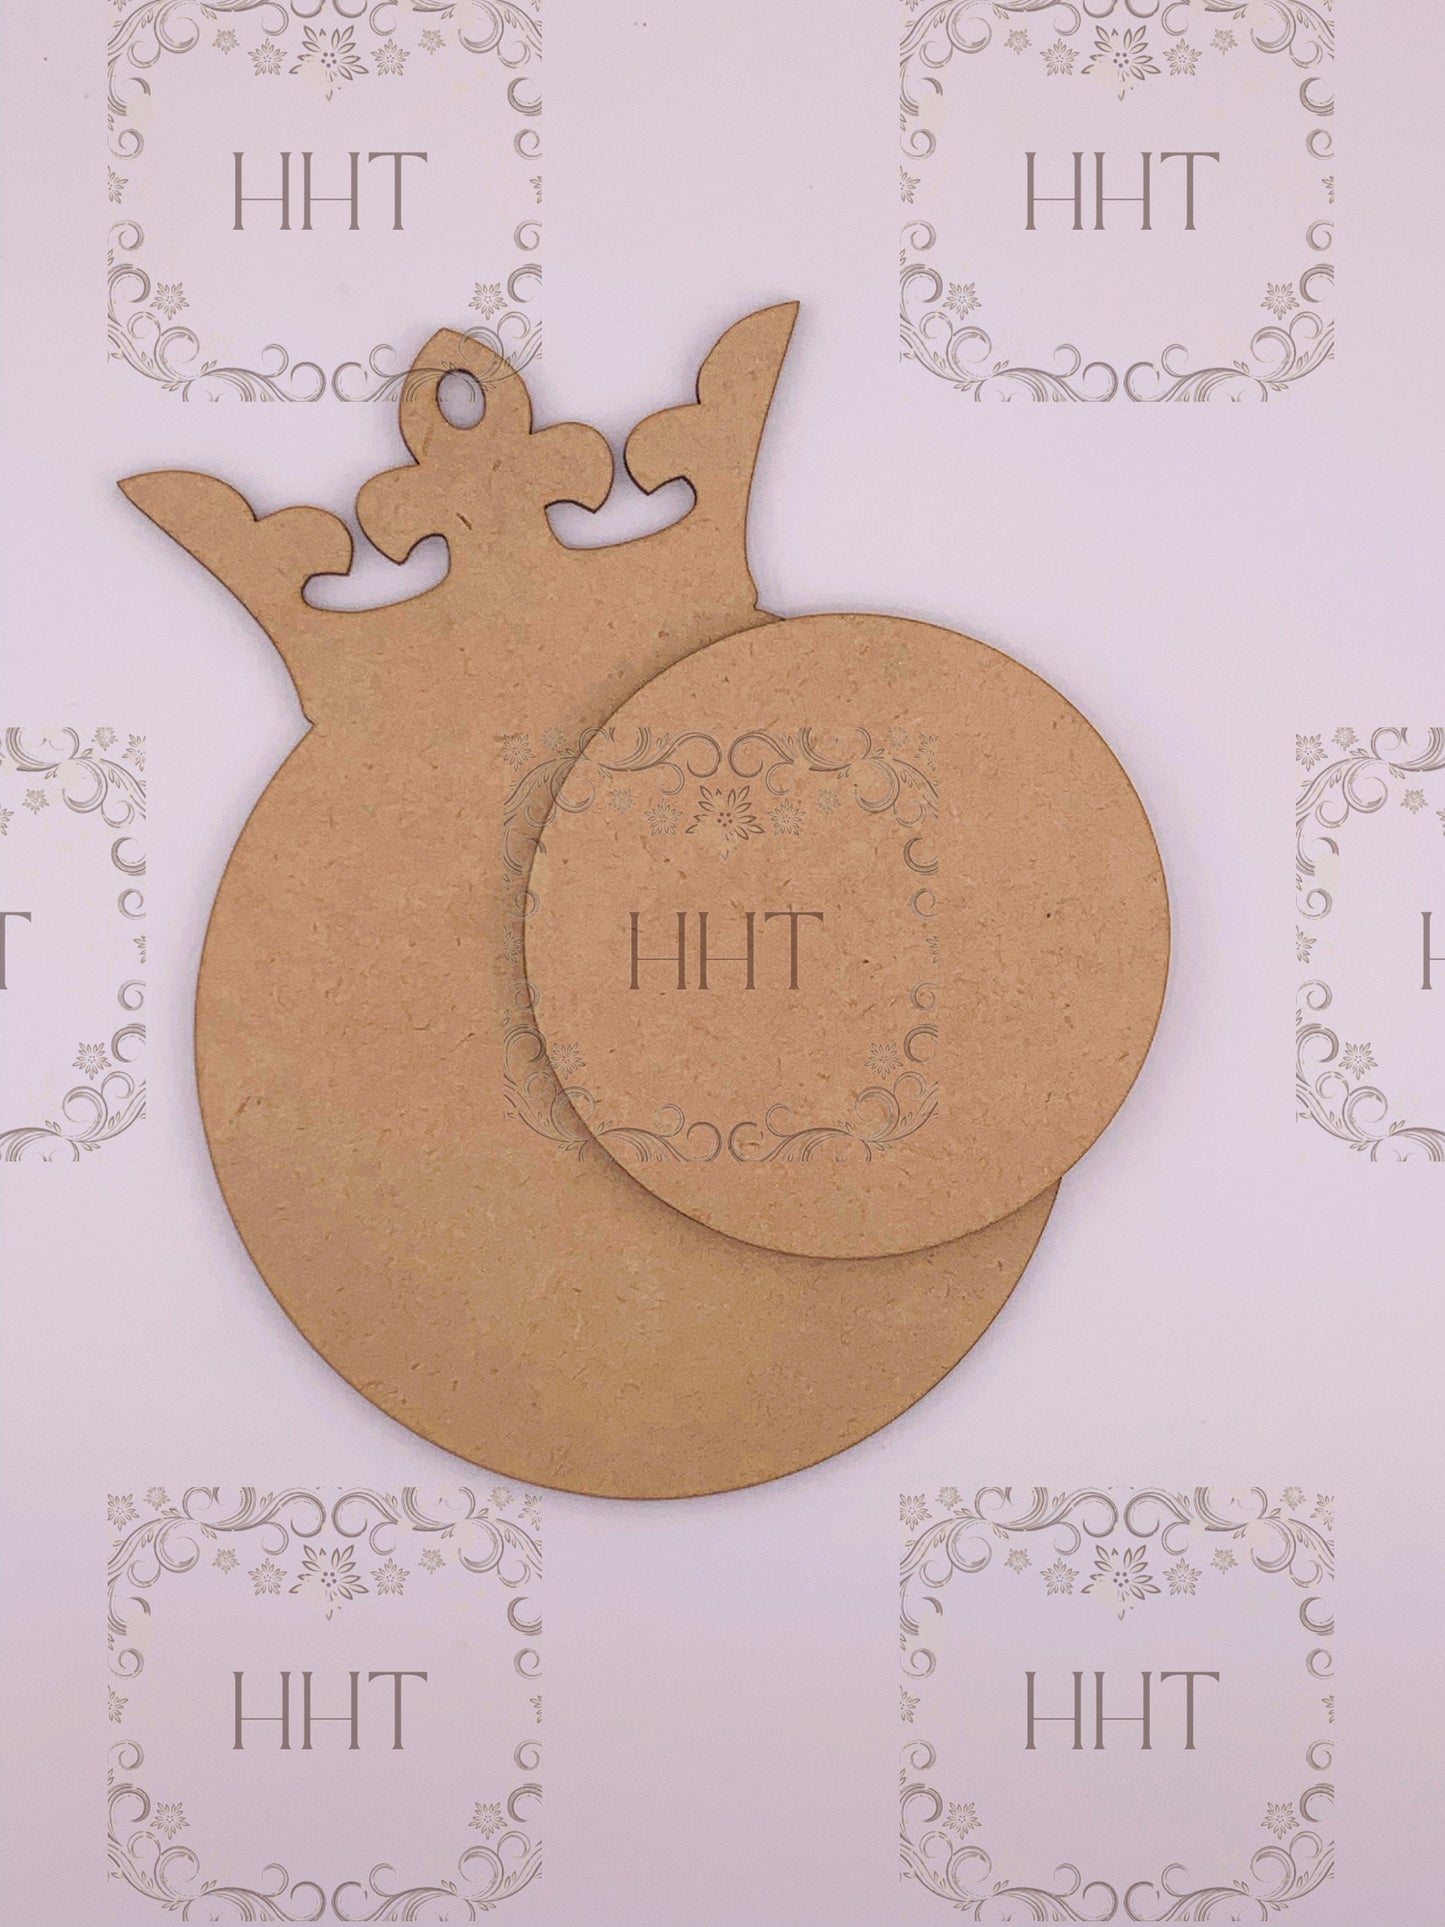 Laser Cut MDF, Ornament. Base, Blank, Princess, Queen, King, Crown, Center Overlay, 2 pc for Decoupage, Crafts, Mixed Media,, 1/8